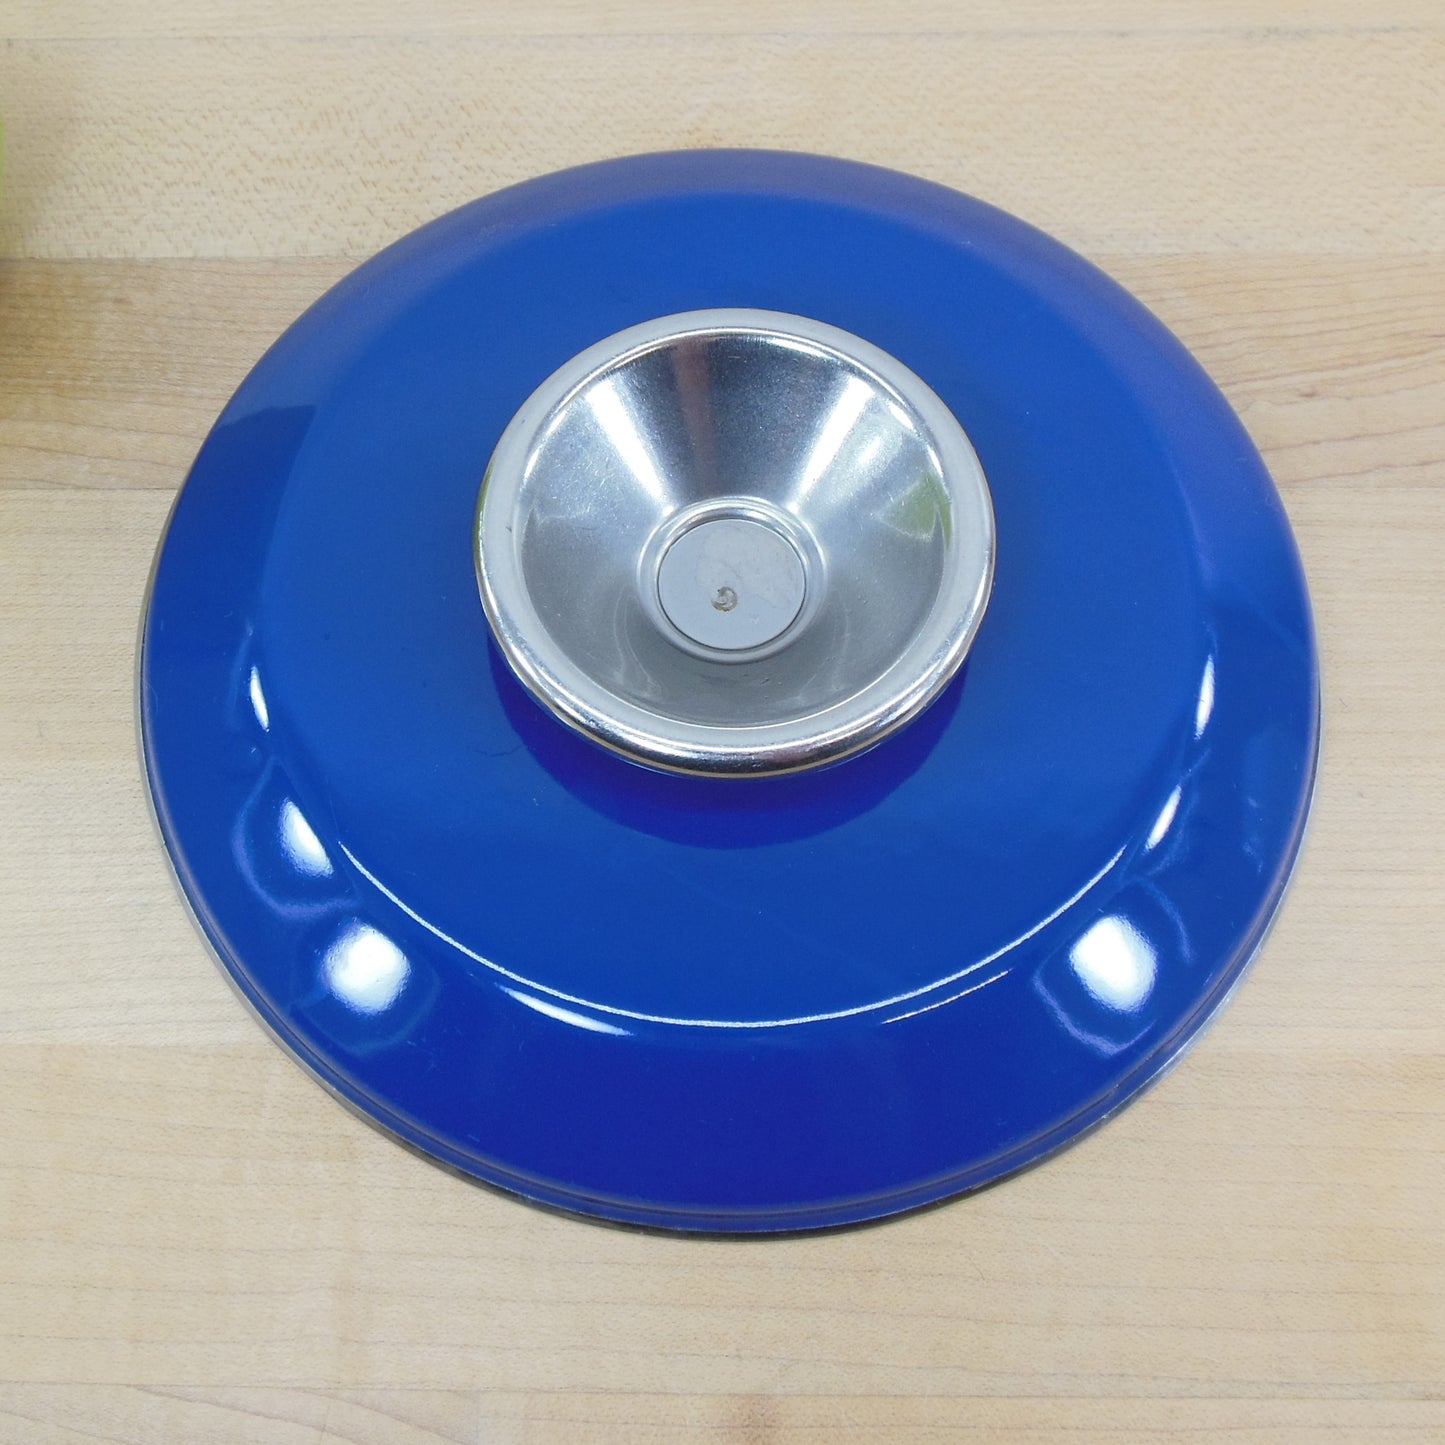 Cathrineholm Norway Cobalt Blue 6-3/4" Replacement Lid